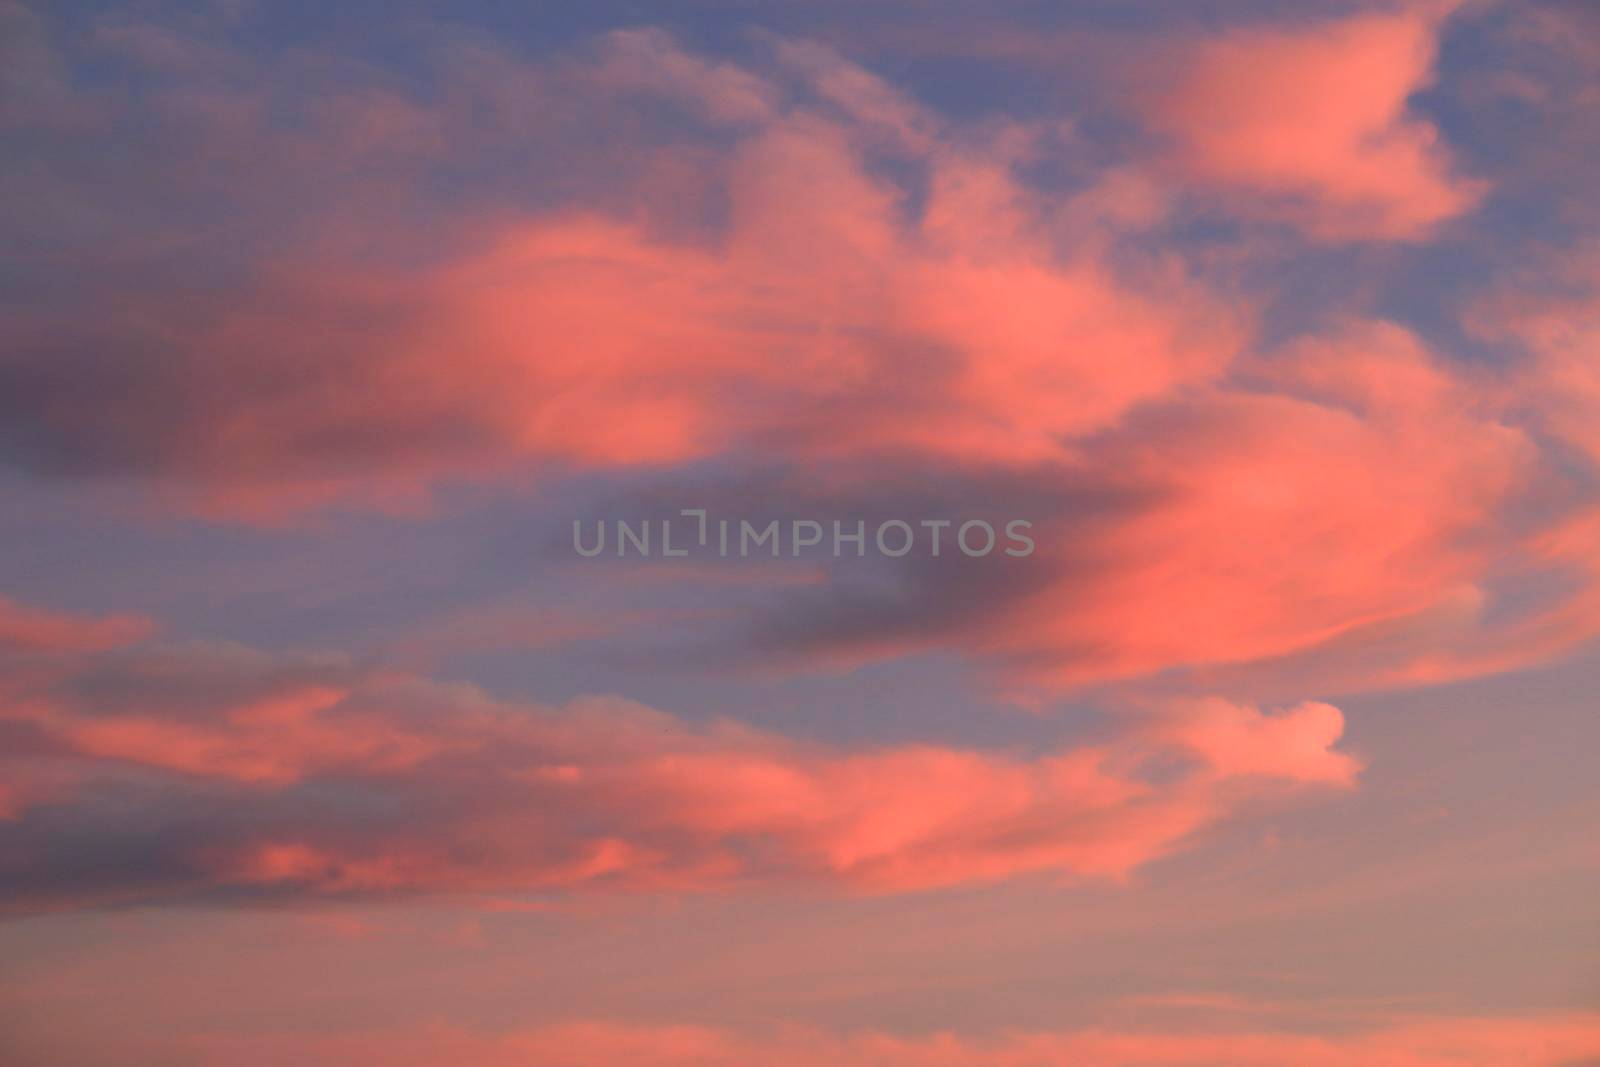 Pink Clouds and lovely sky at Sunset in Spain by soniabonet